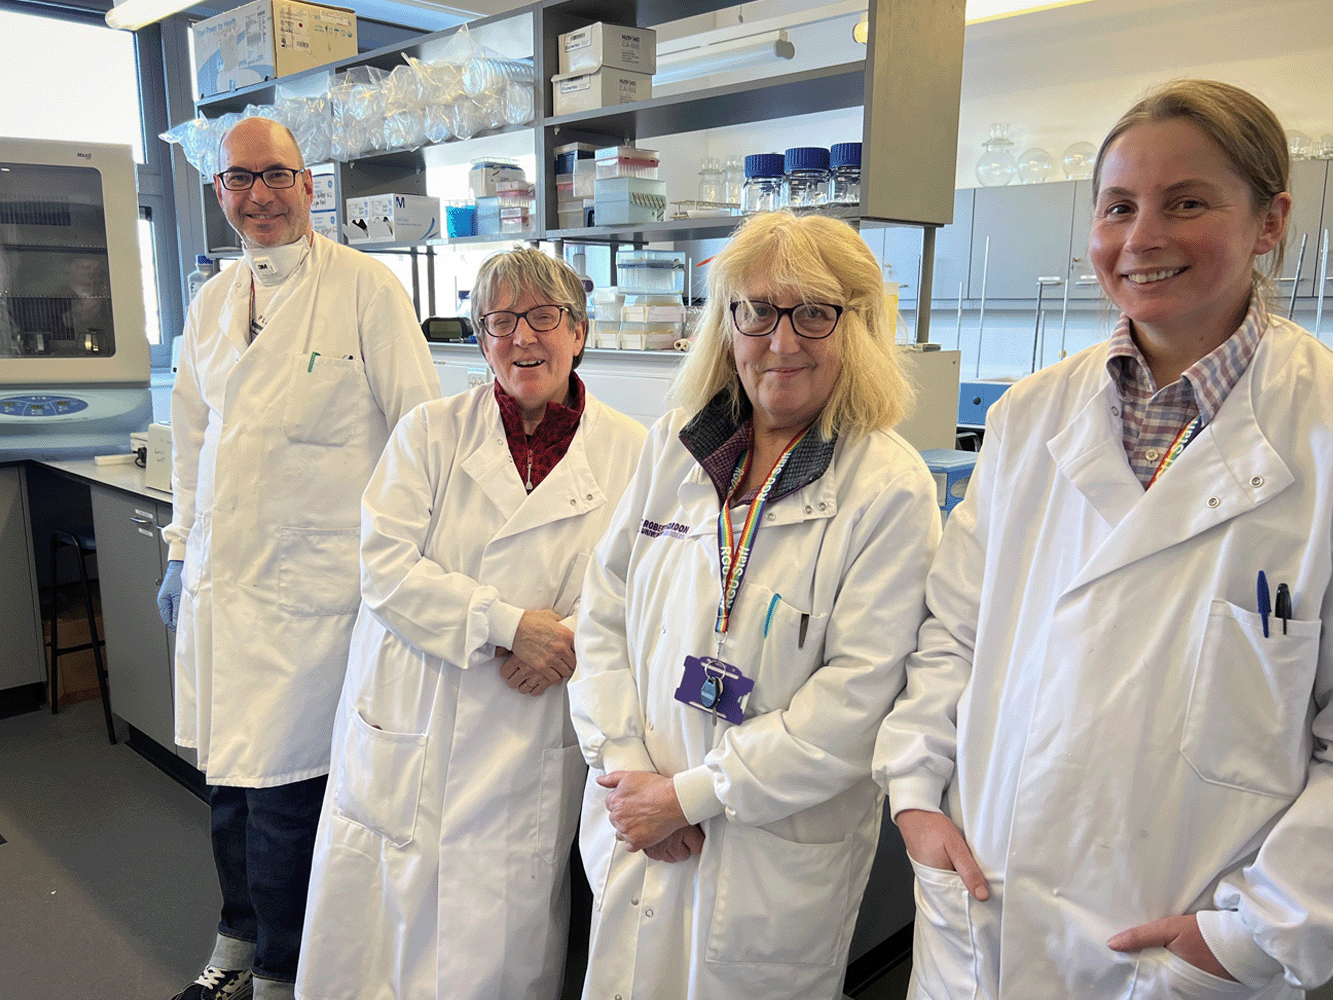 The RGU research team involved in the project